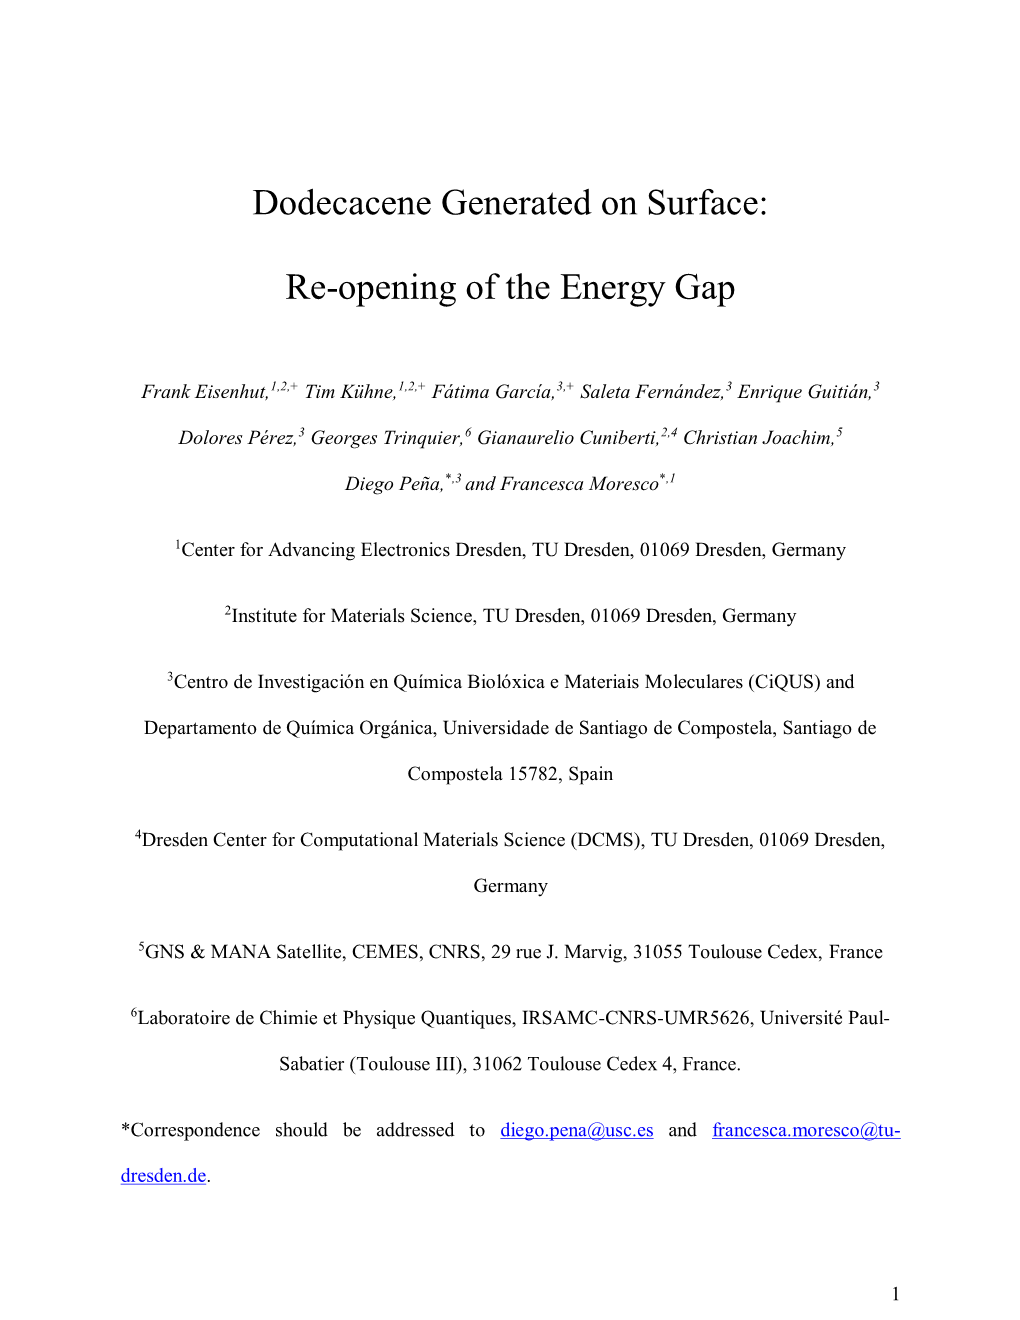 Dodecacene Generated on Surface: Re-Opening of the Energy Gap